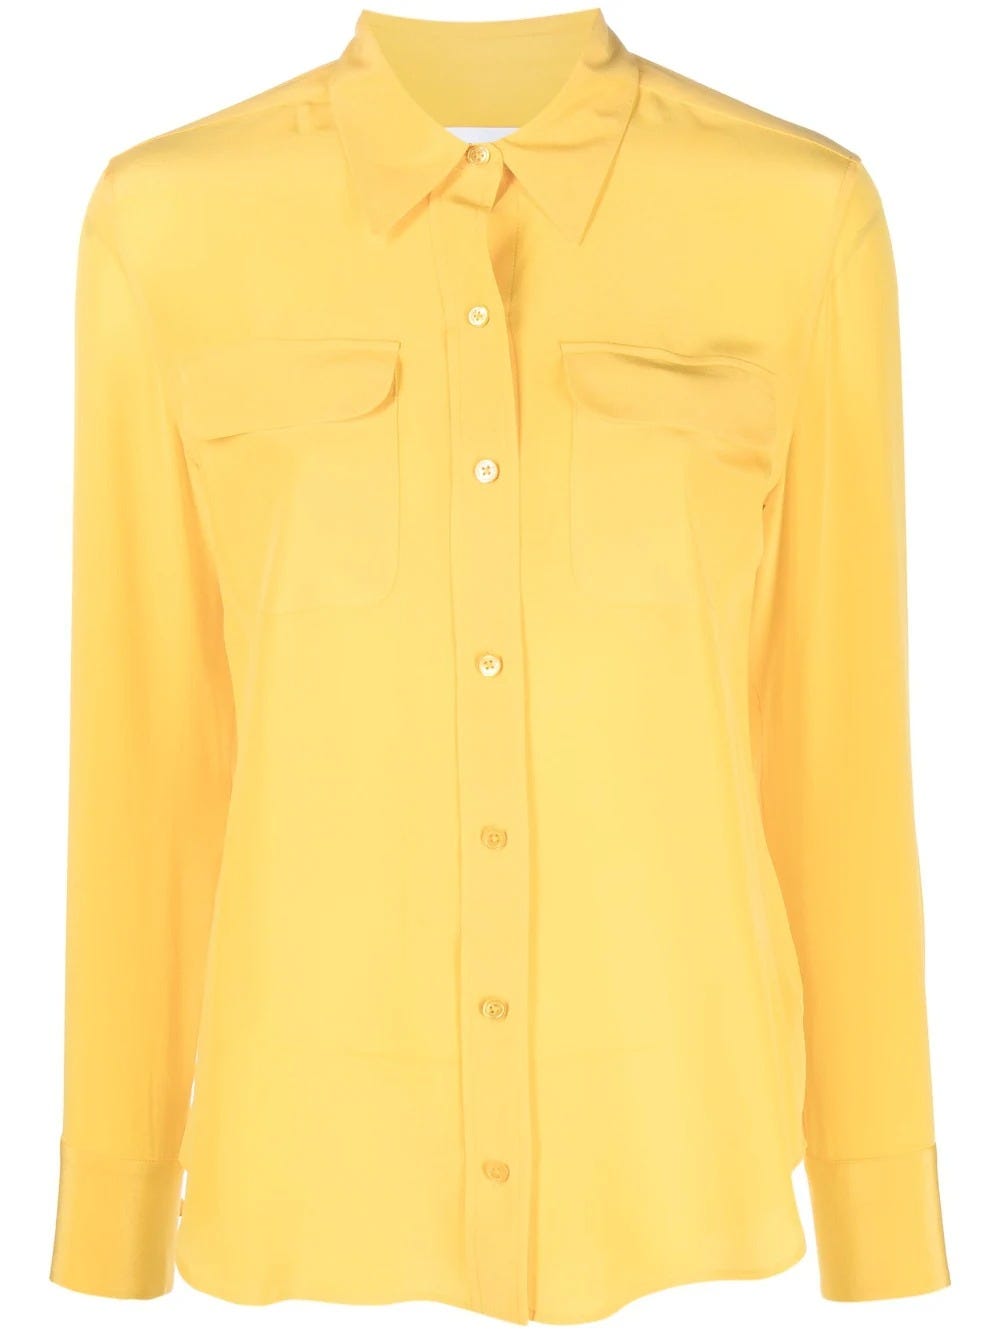 EQUIPMENT YELLOW SHIRT WITH LONG SLEEVES